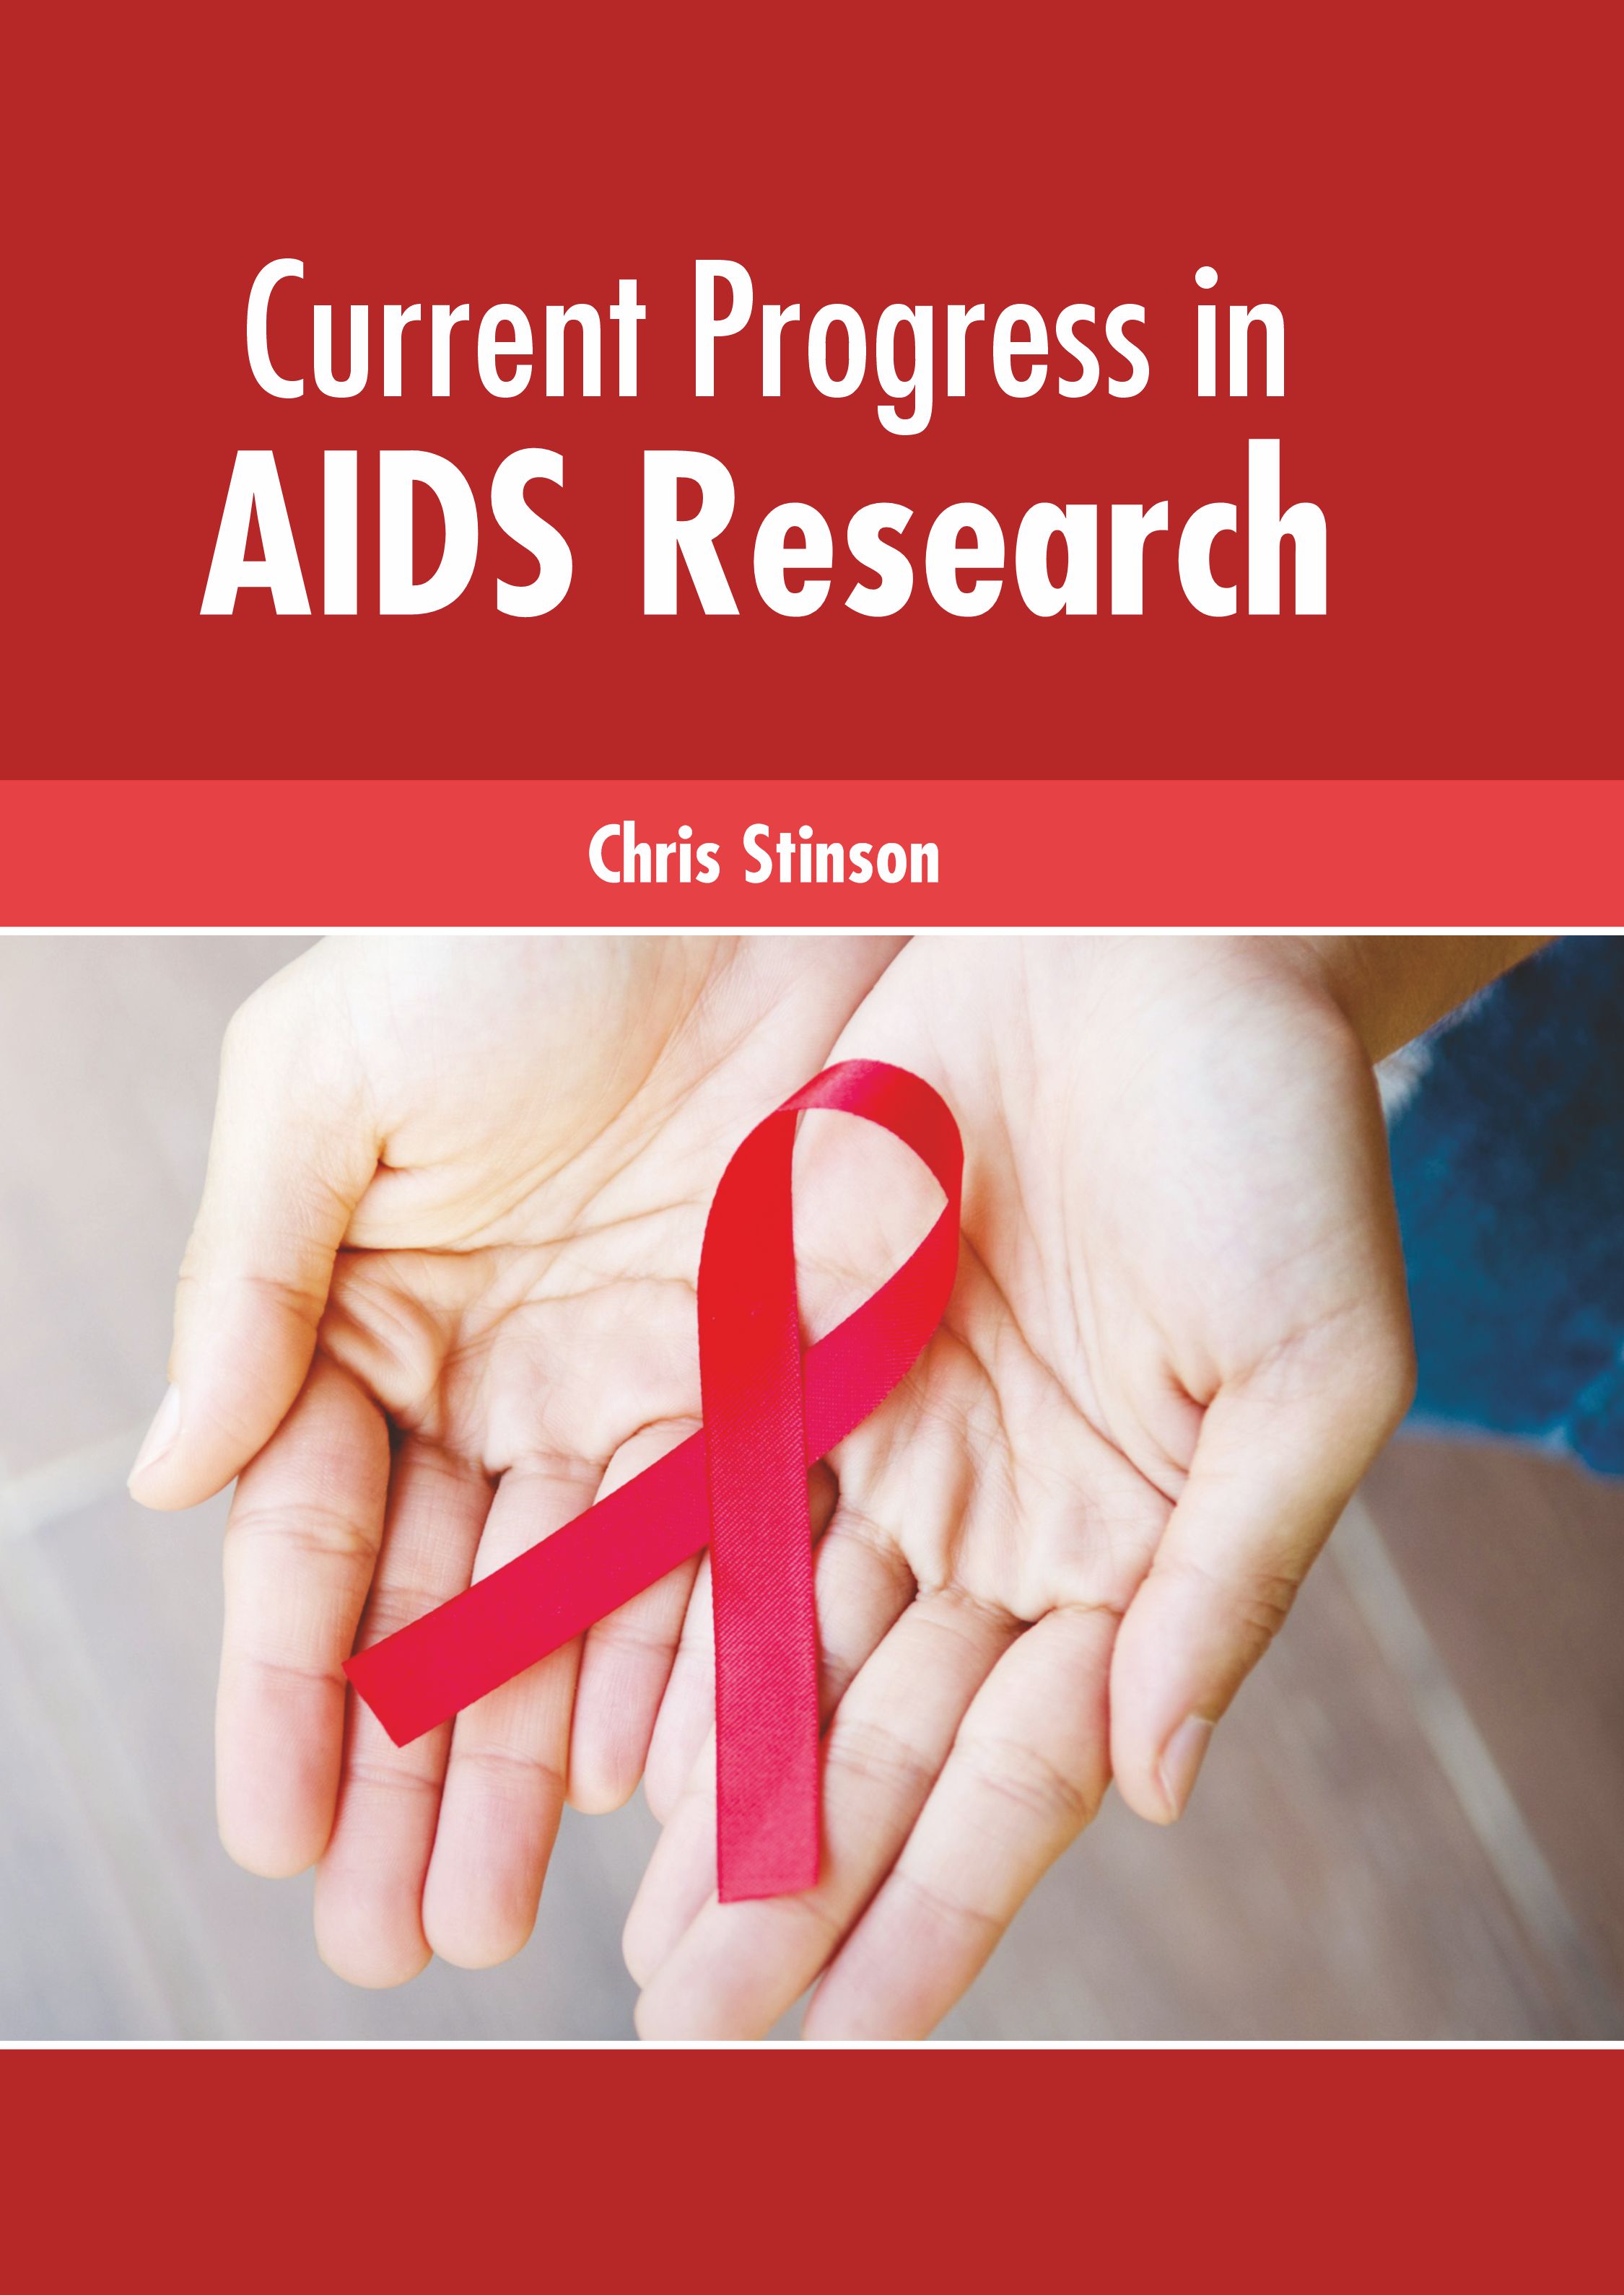 

exclusive-publishers/american-medical-publishers/current-progress-in-aids-research-9781639272013